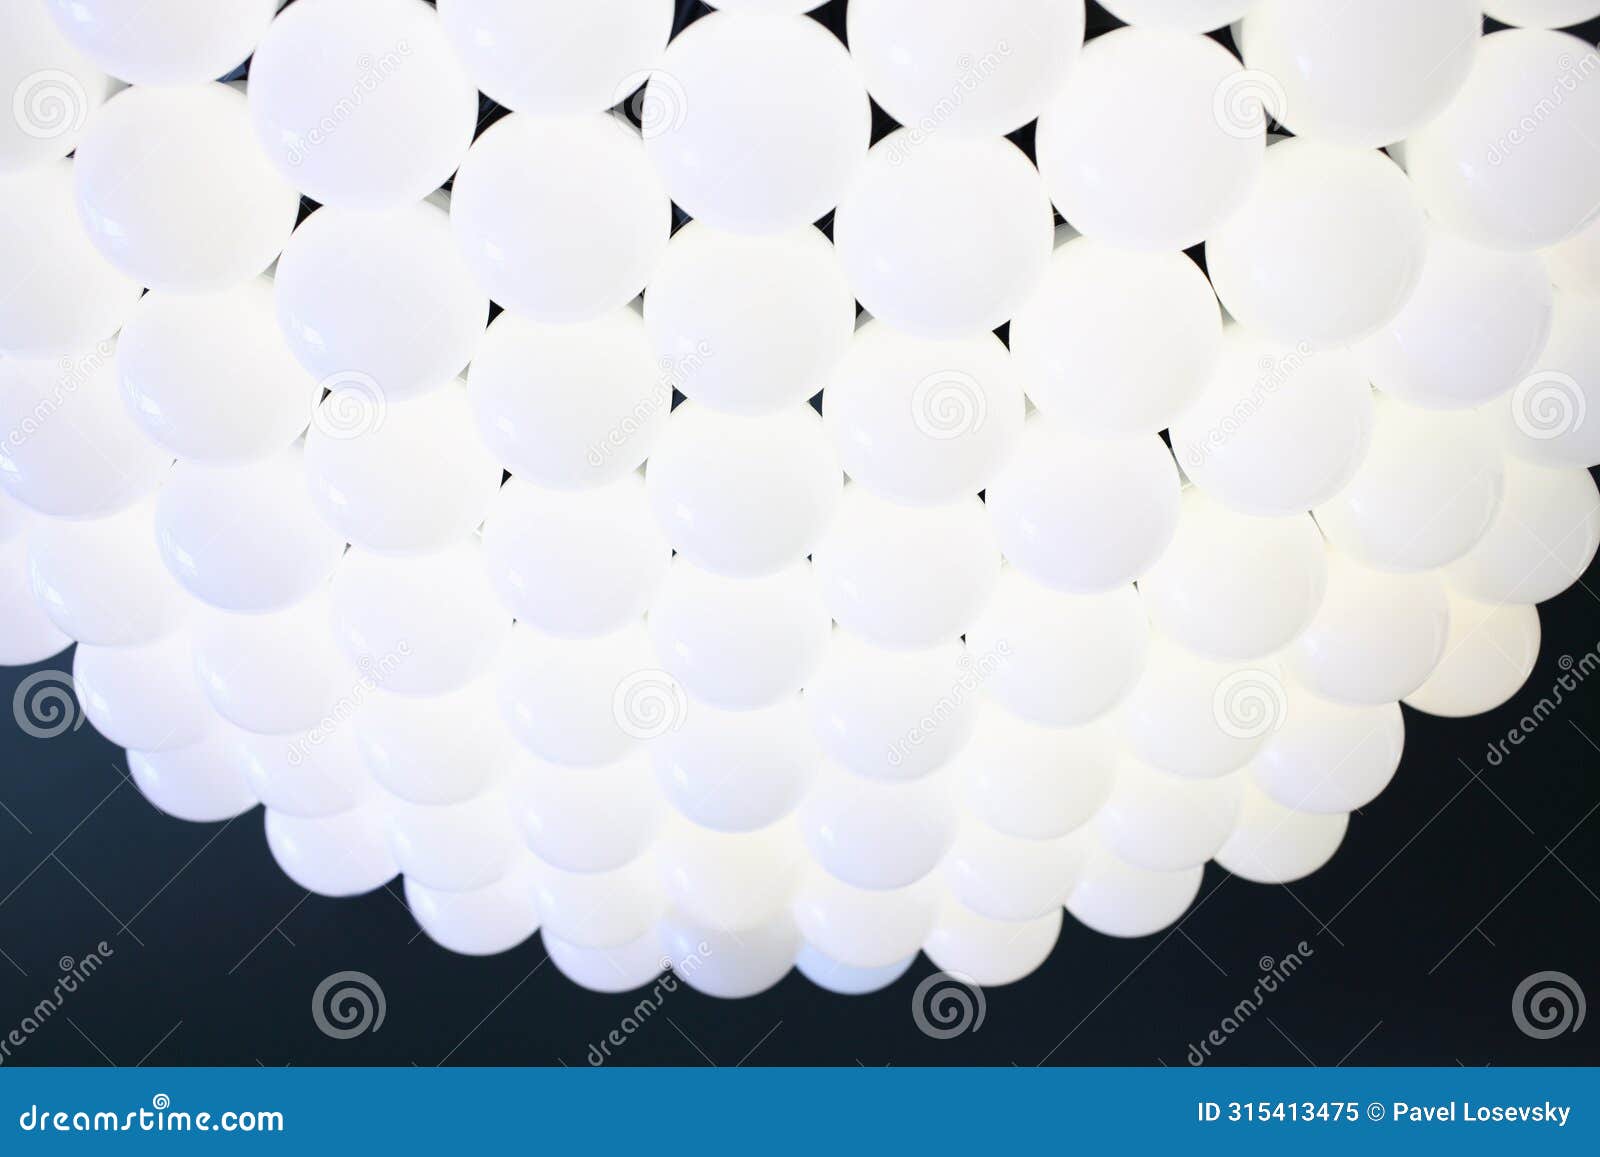 beautiful chandelier composed of a plurality of